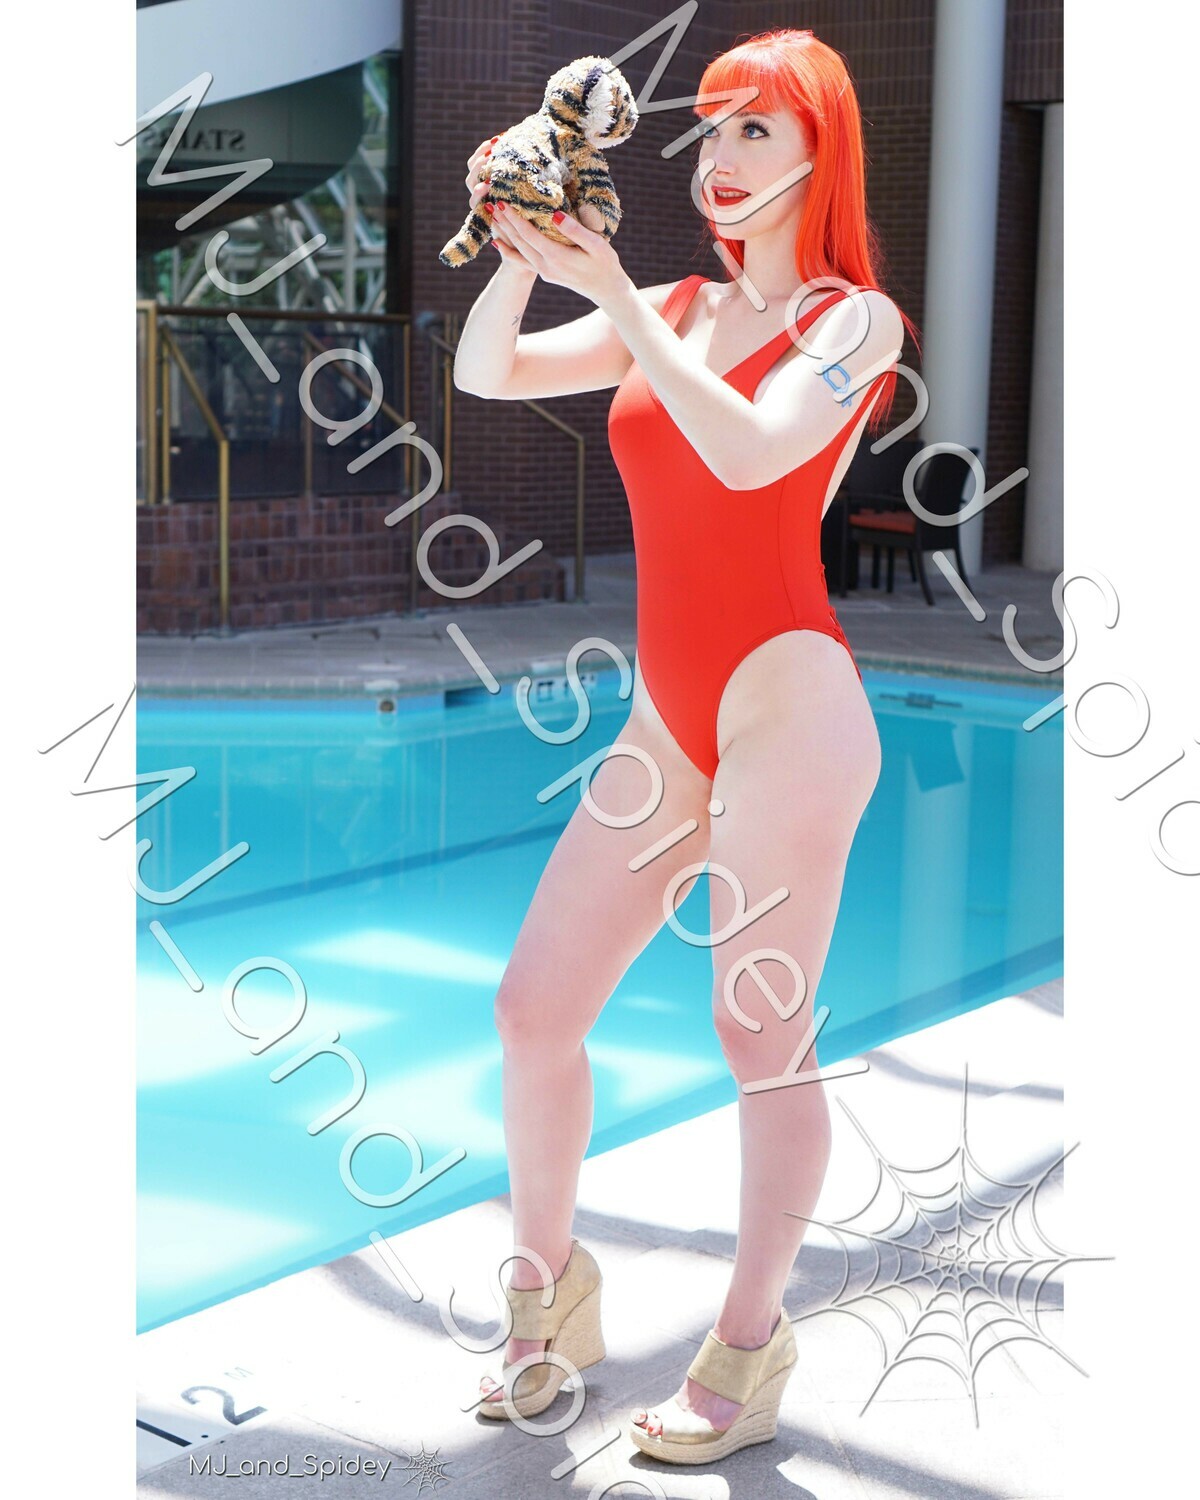 Marvel - Spider-Man - Mary Jane Watson - Swimsuit 9 - Digital Cosplay Image (@MJ_and_Spidey, MJ and Spidey, Comics)